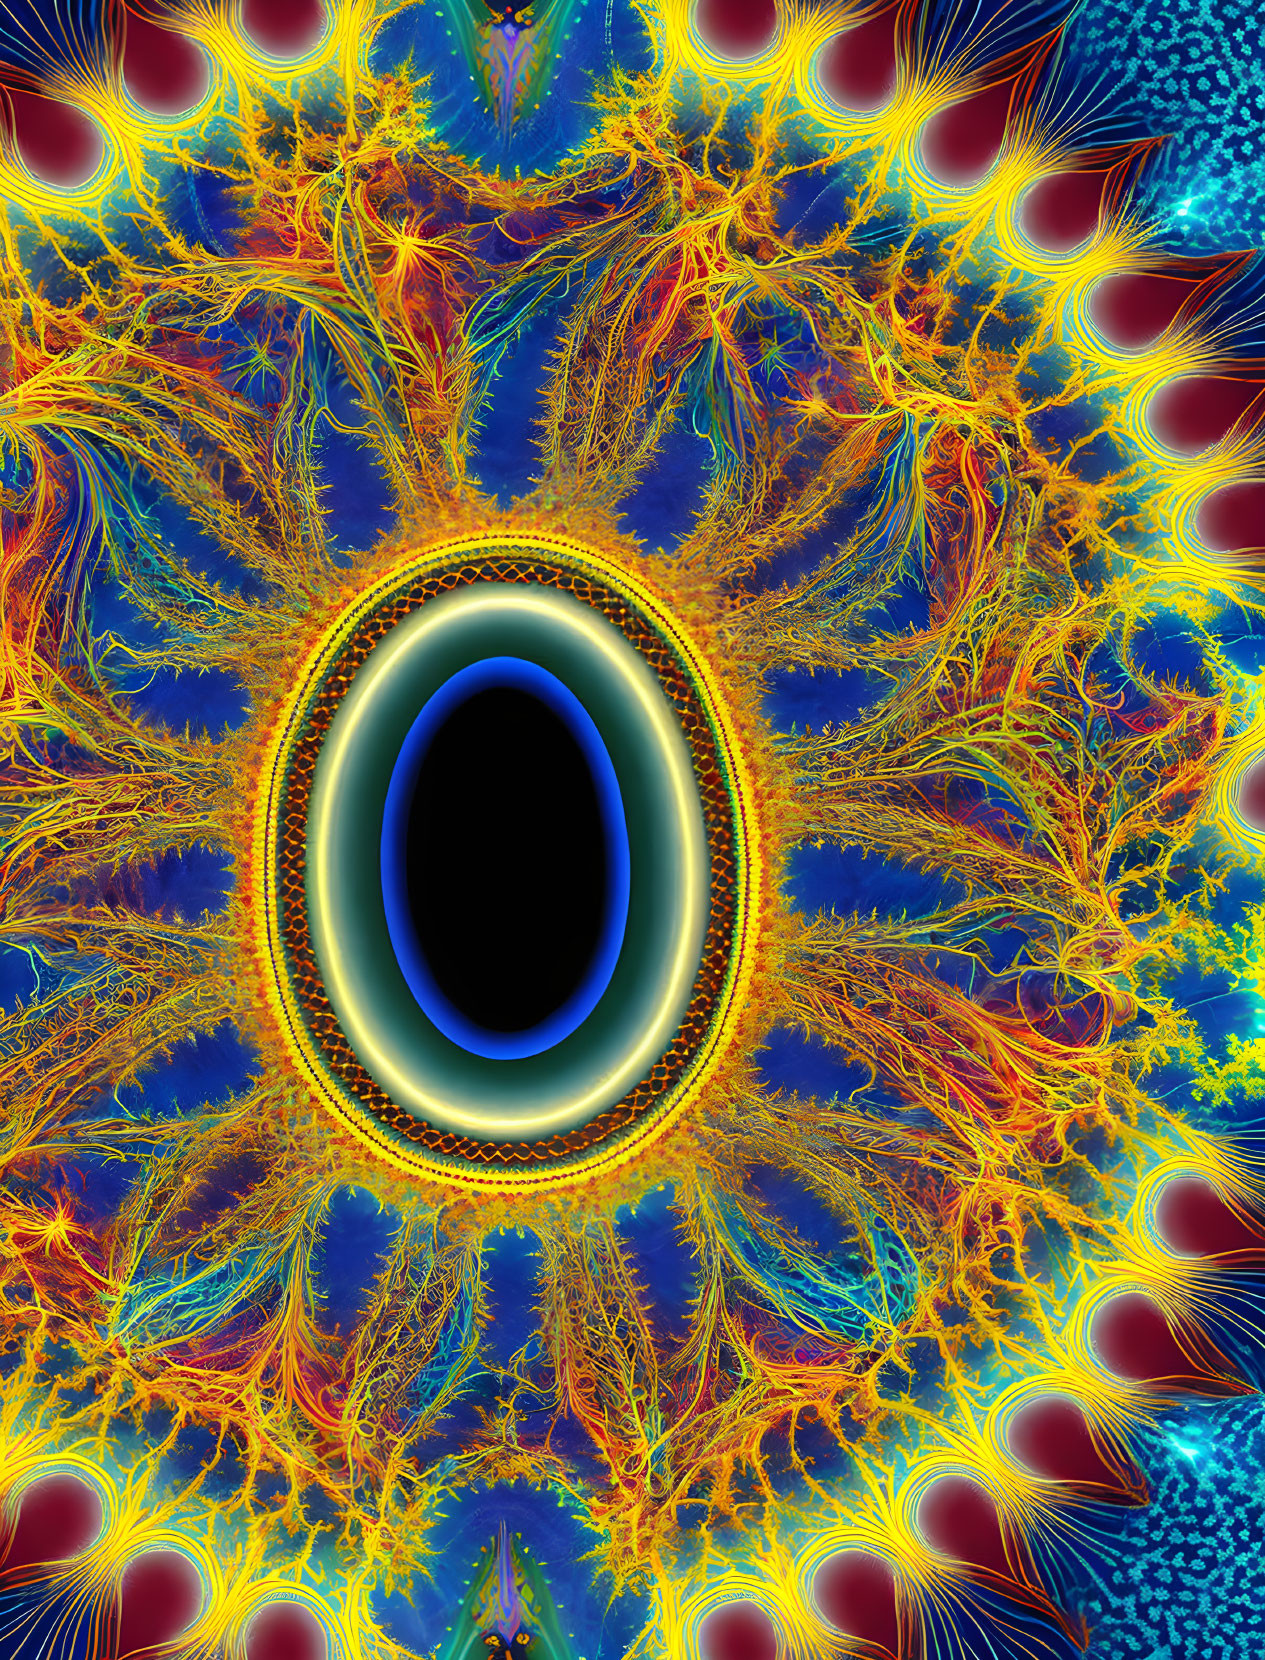 Colorful Fractal Art: Dark Oval Surrounded by Fiery Blue, Yellow, and Orange Patterns